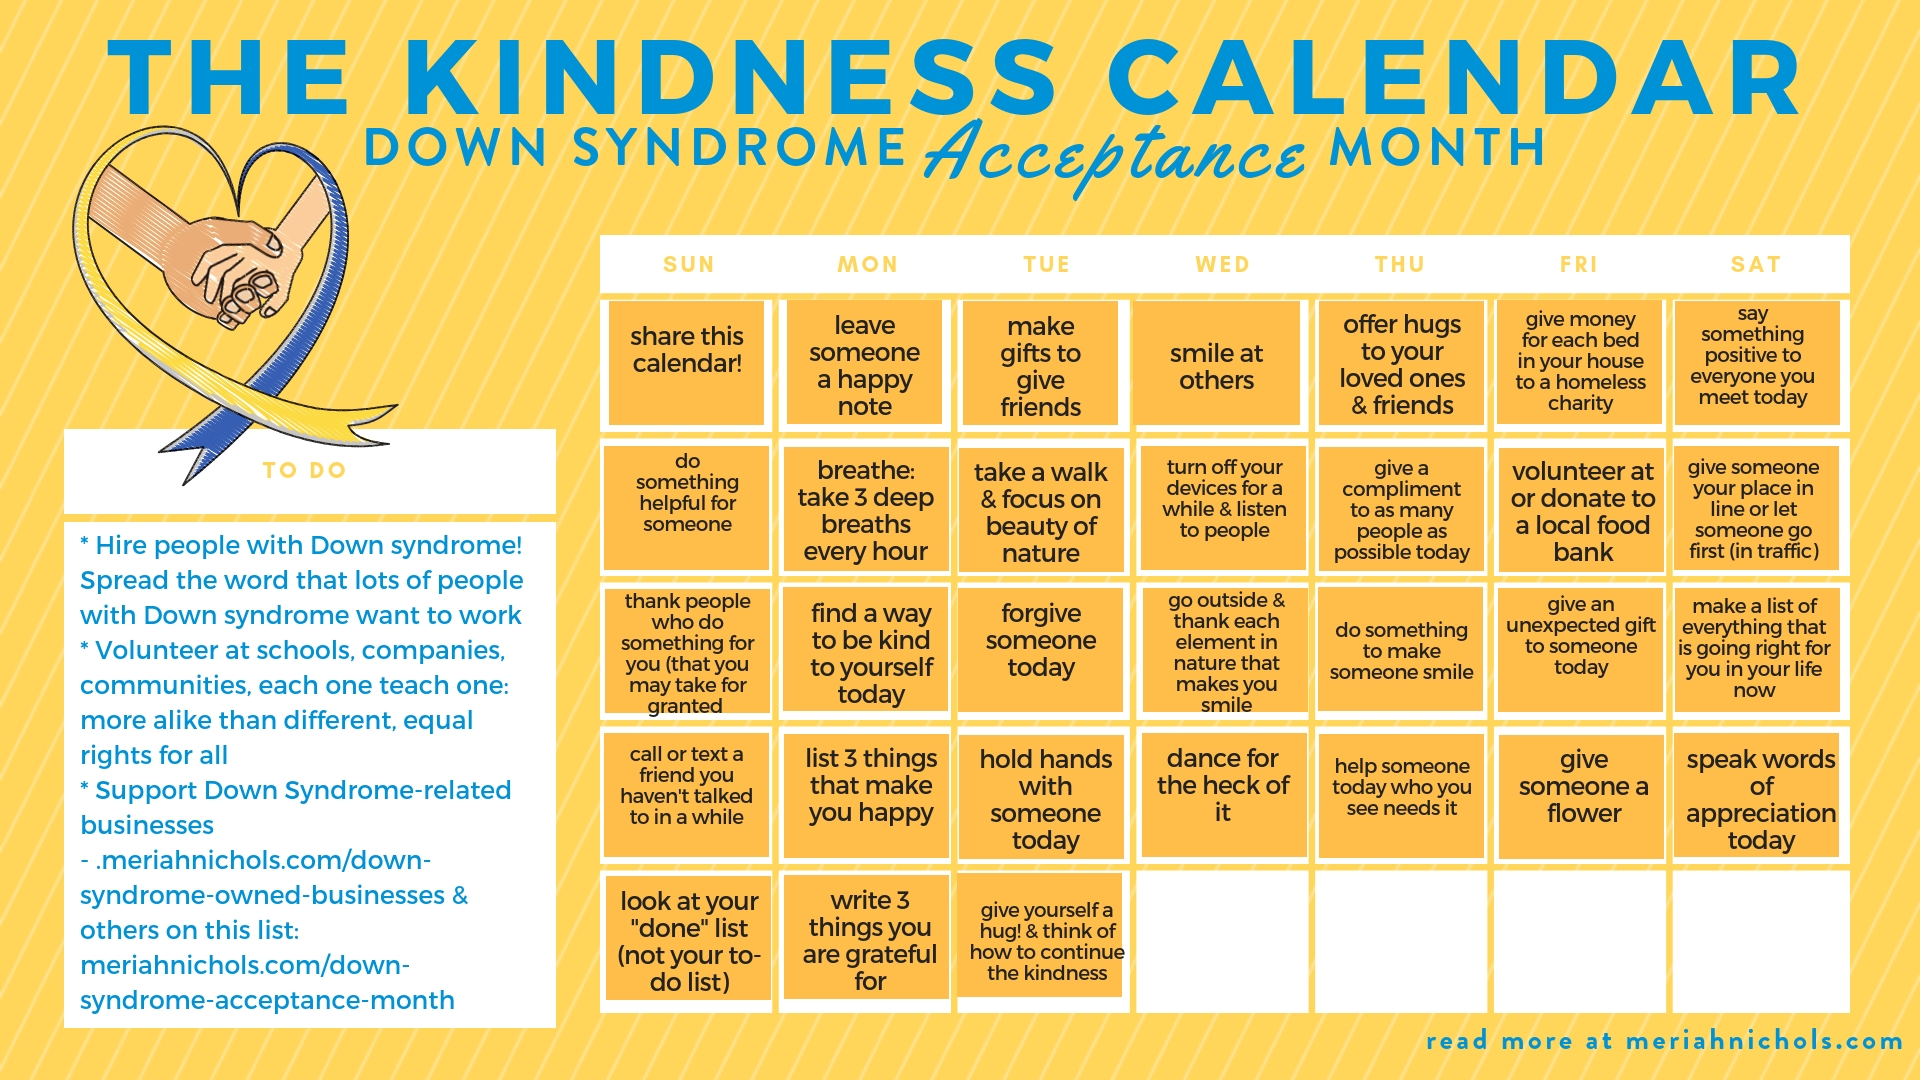 The Kindness Calendar For Down Syndrome Awareness Month! A Calendar Month From Today